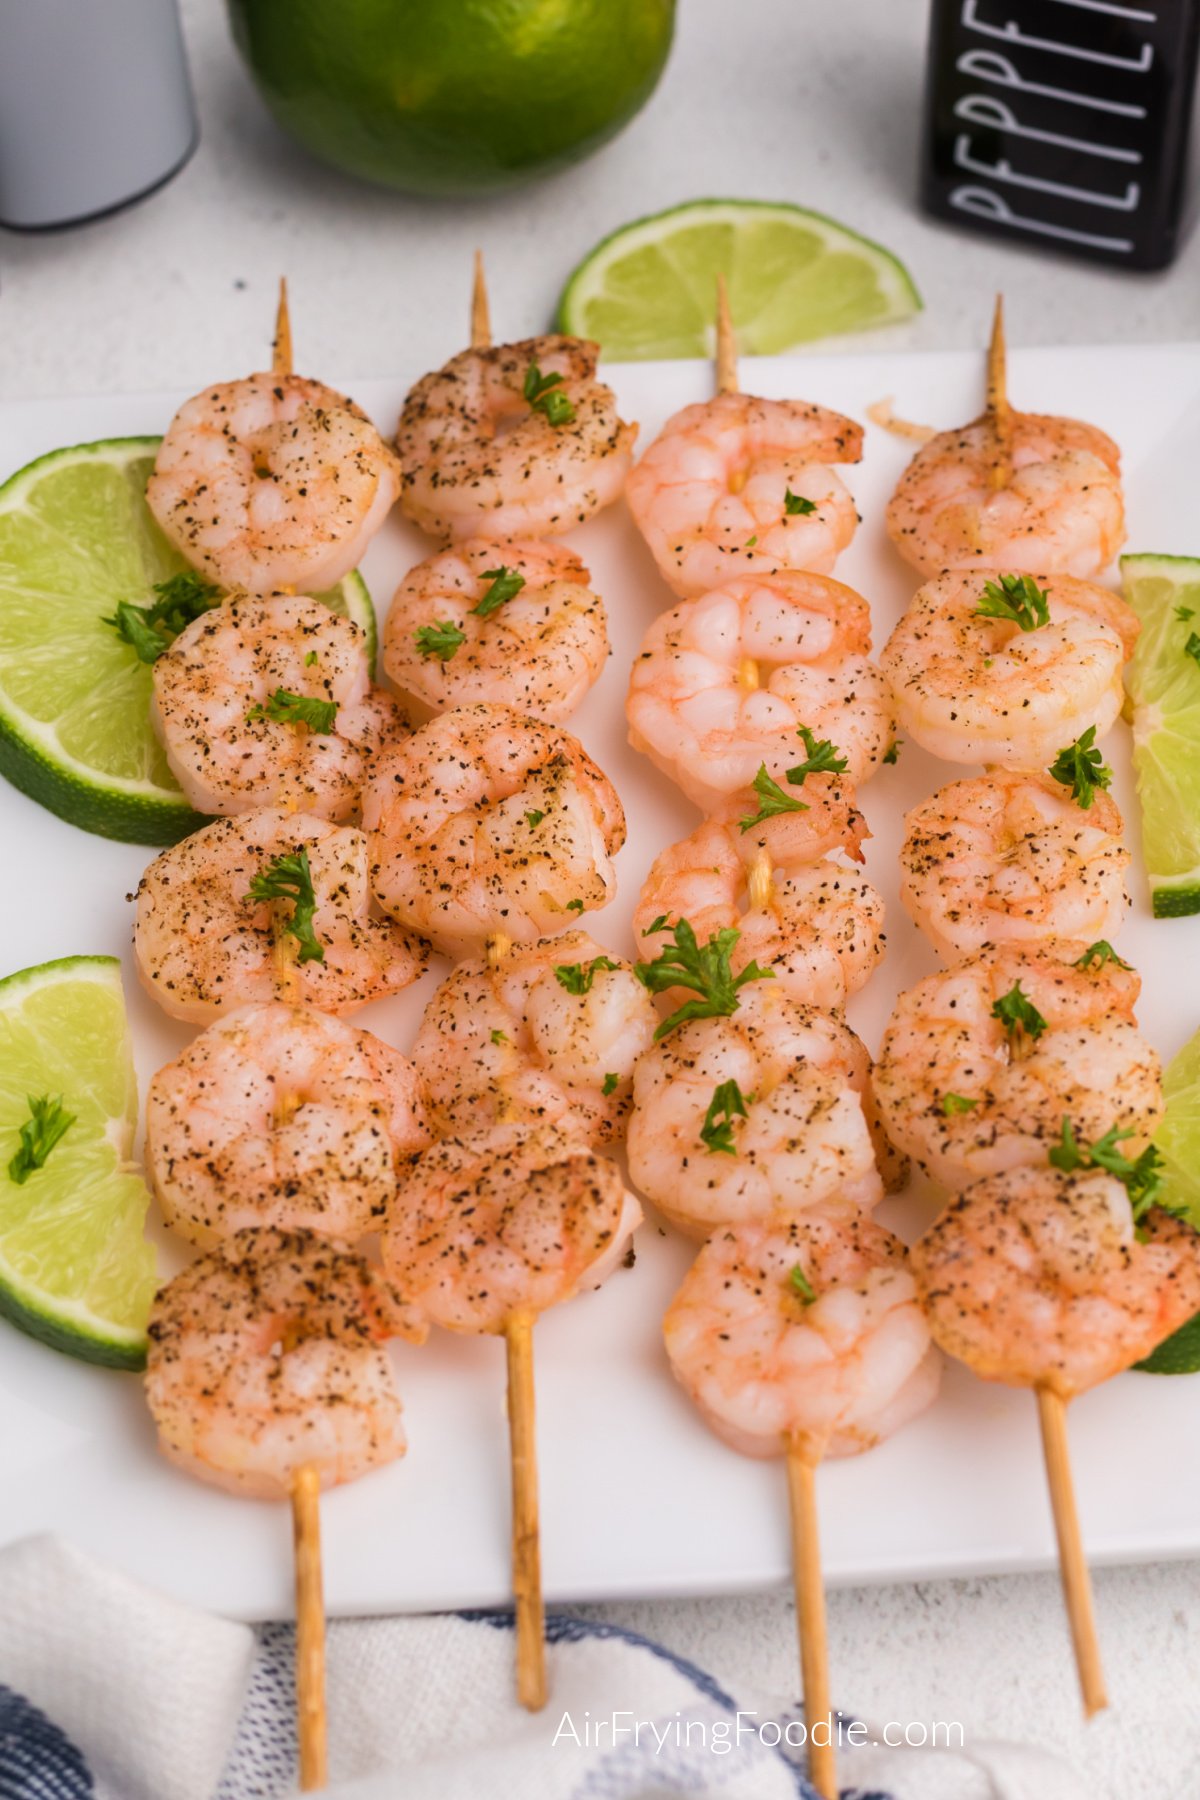 Air fried shrimp skewers on a white plate with sliced of lime.